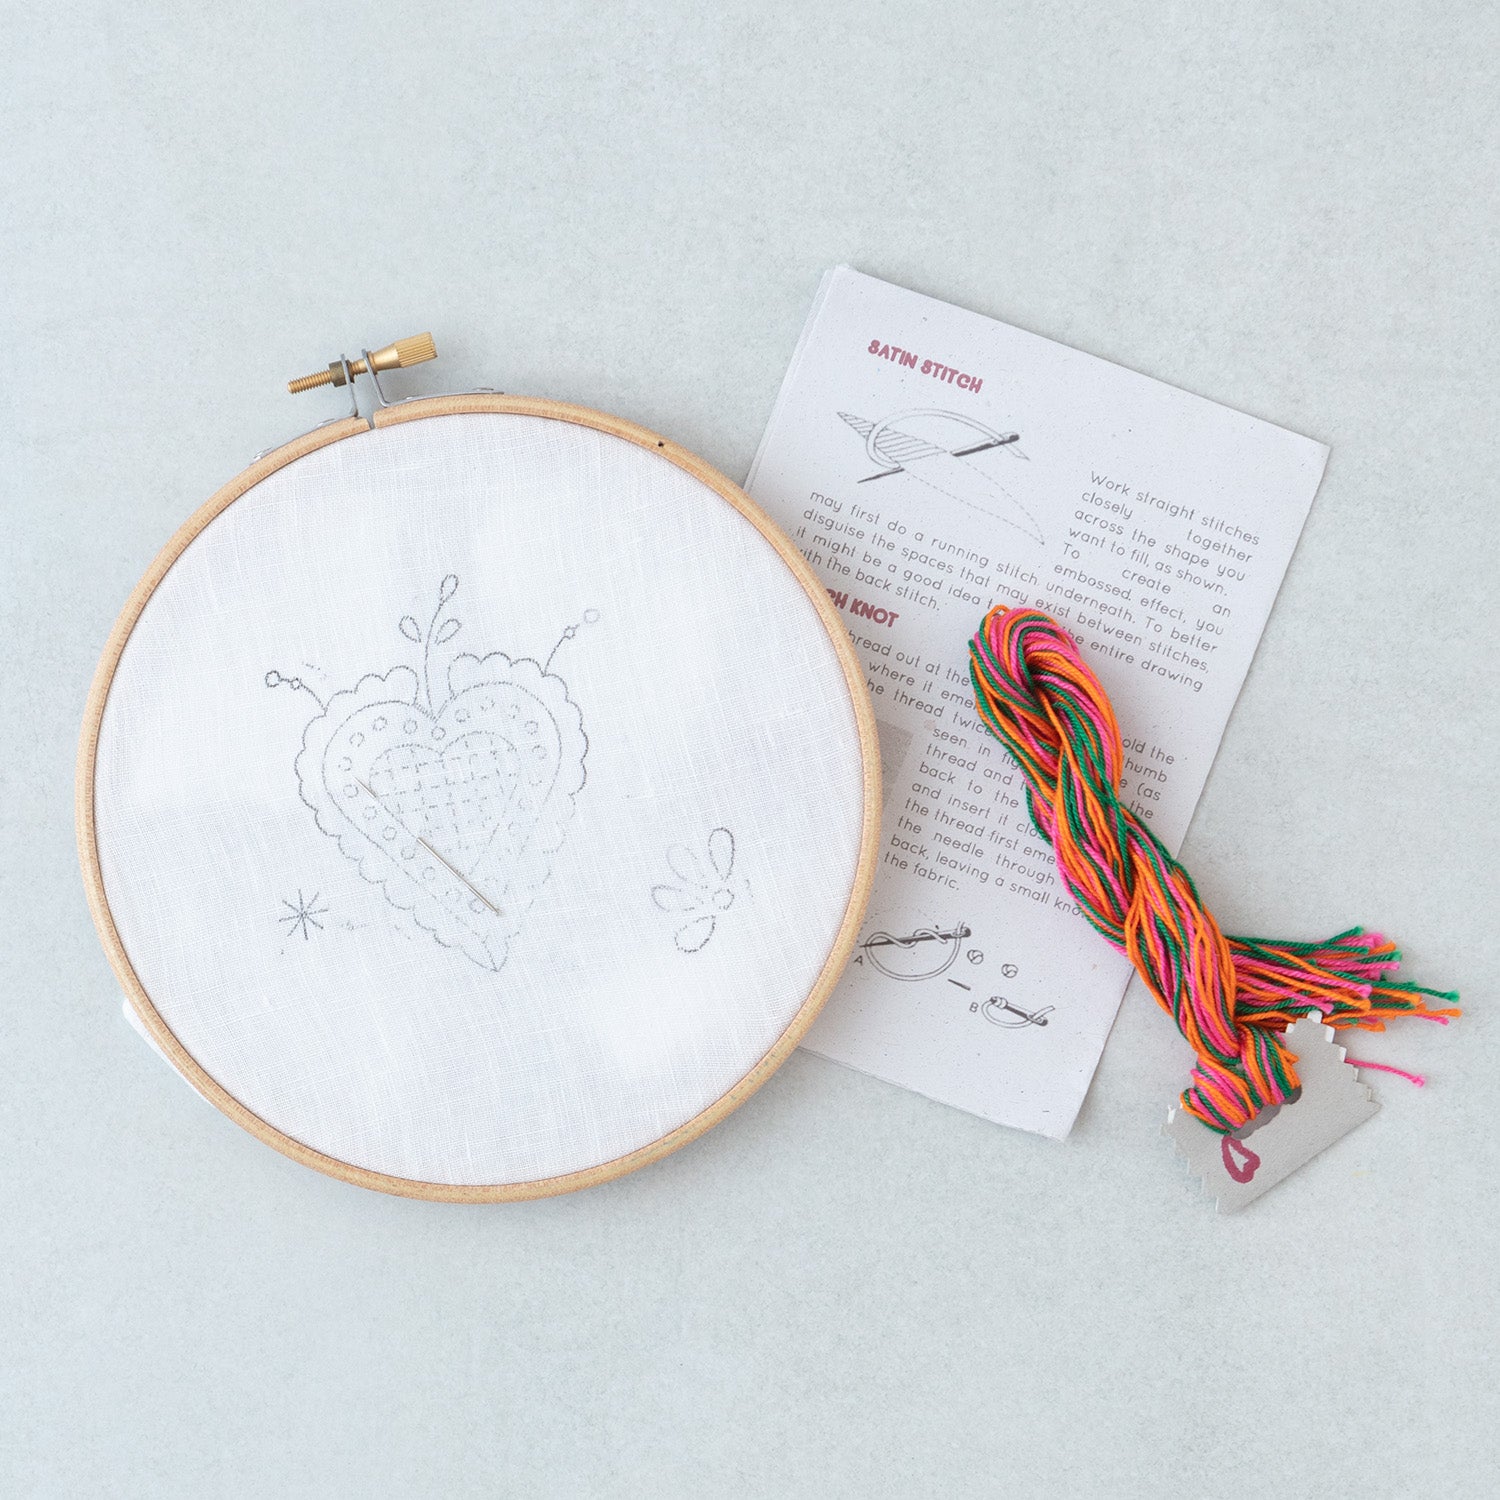 Embroidery Kit for beginners - Viana's heart Portuguese motif